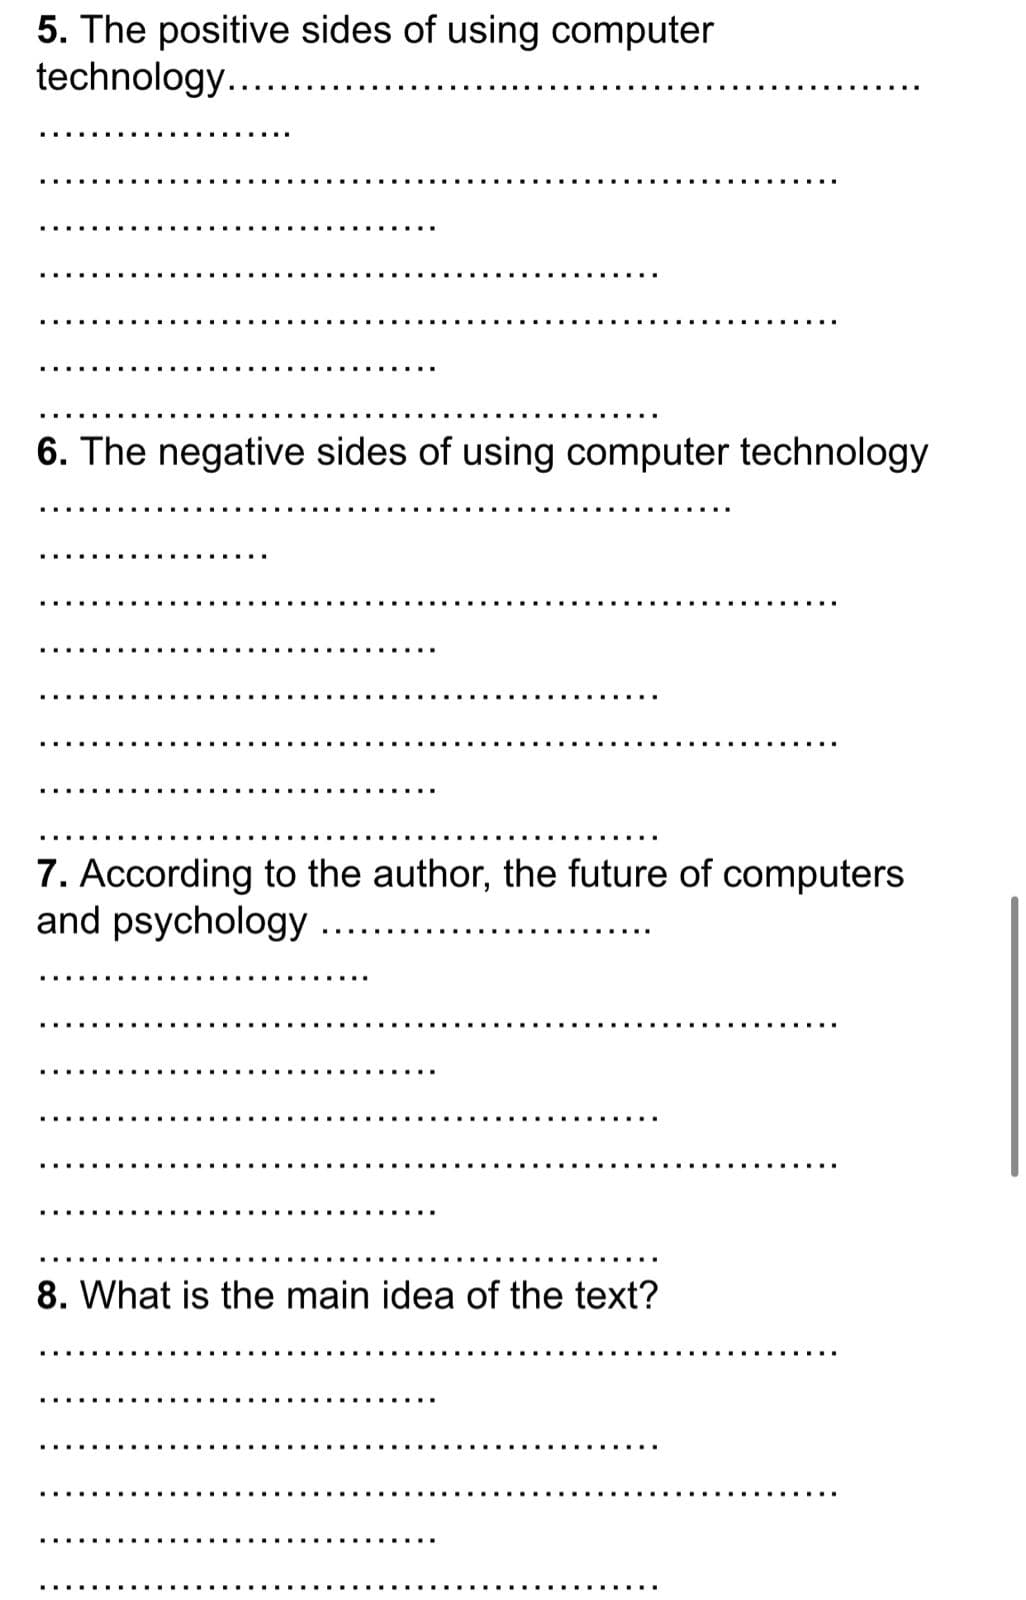 5. The positive sides of using computer
technology...
6. The negative sides of using computer technology
.....
7. According to the author, the future of computers
and psychology
8. What is the main idea of the text?
